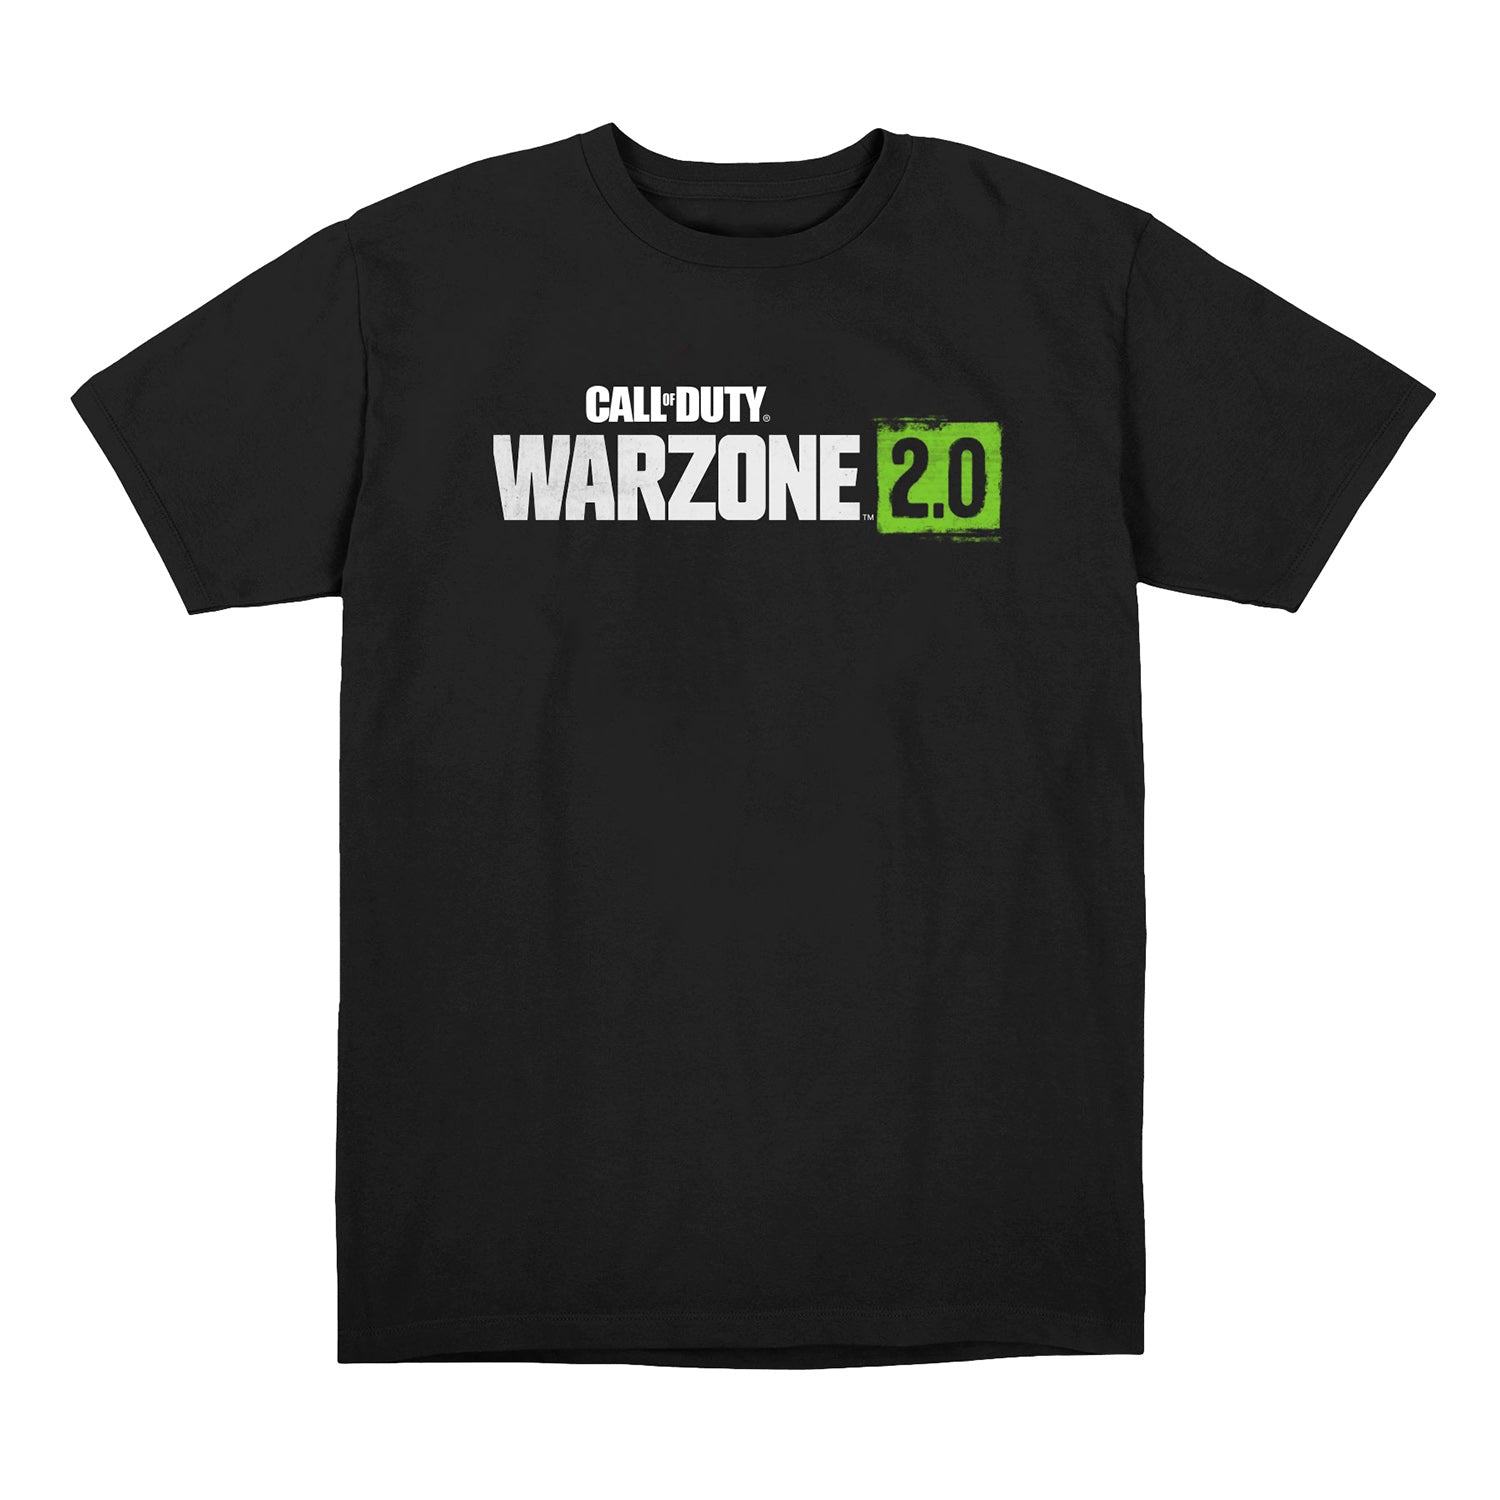 Call of Duty: Warzone 2.0 Black T-Shirt - Front View